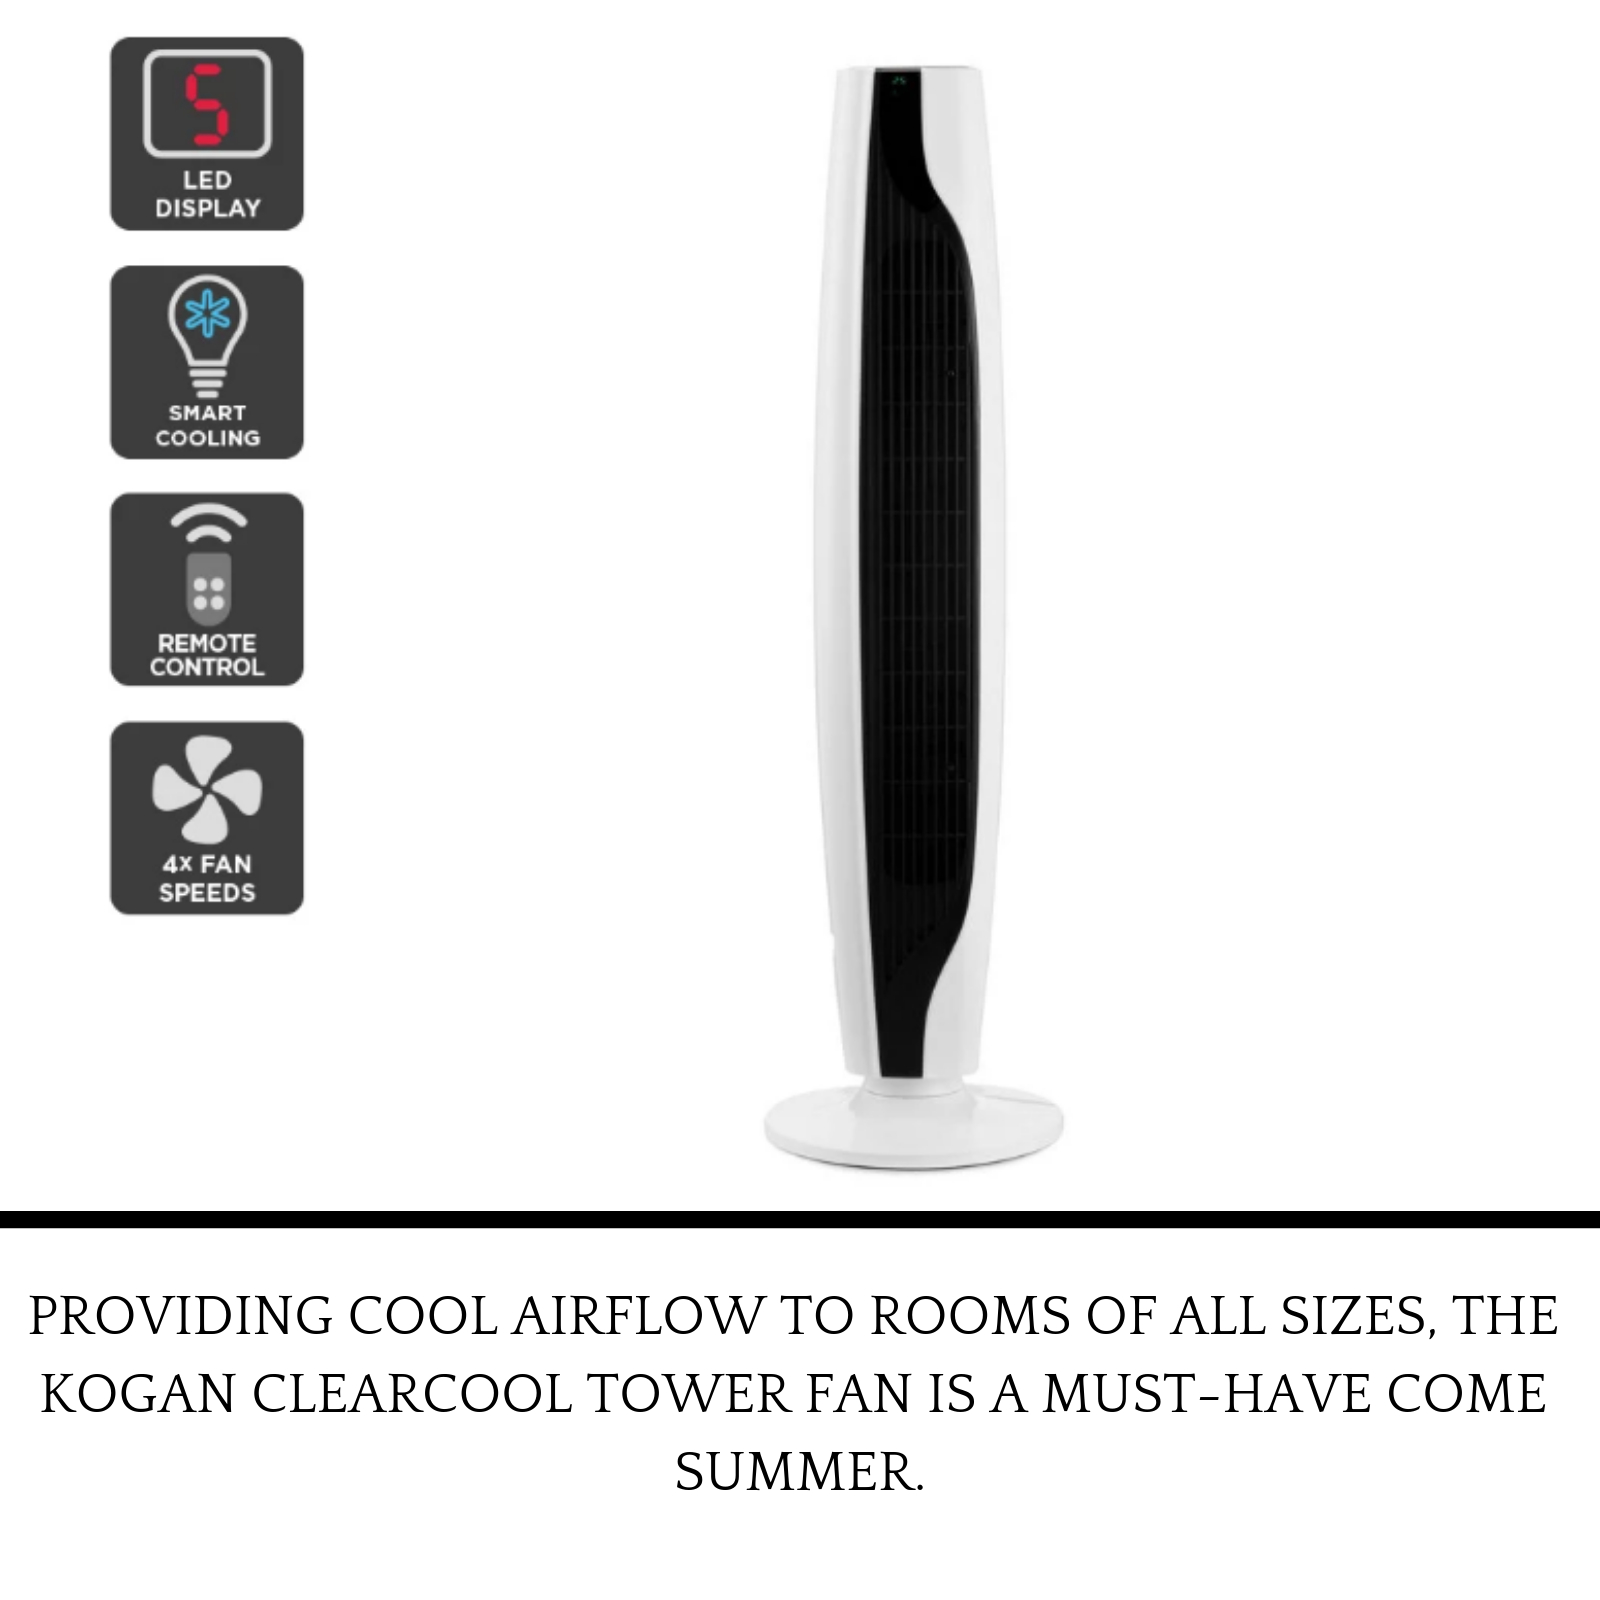 Details About Kogan Clear Cool Tower Fan New Portable Oscillating Touch Fan Wremote Control in size 1600 X 1600